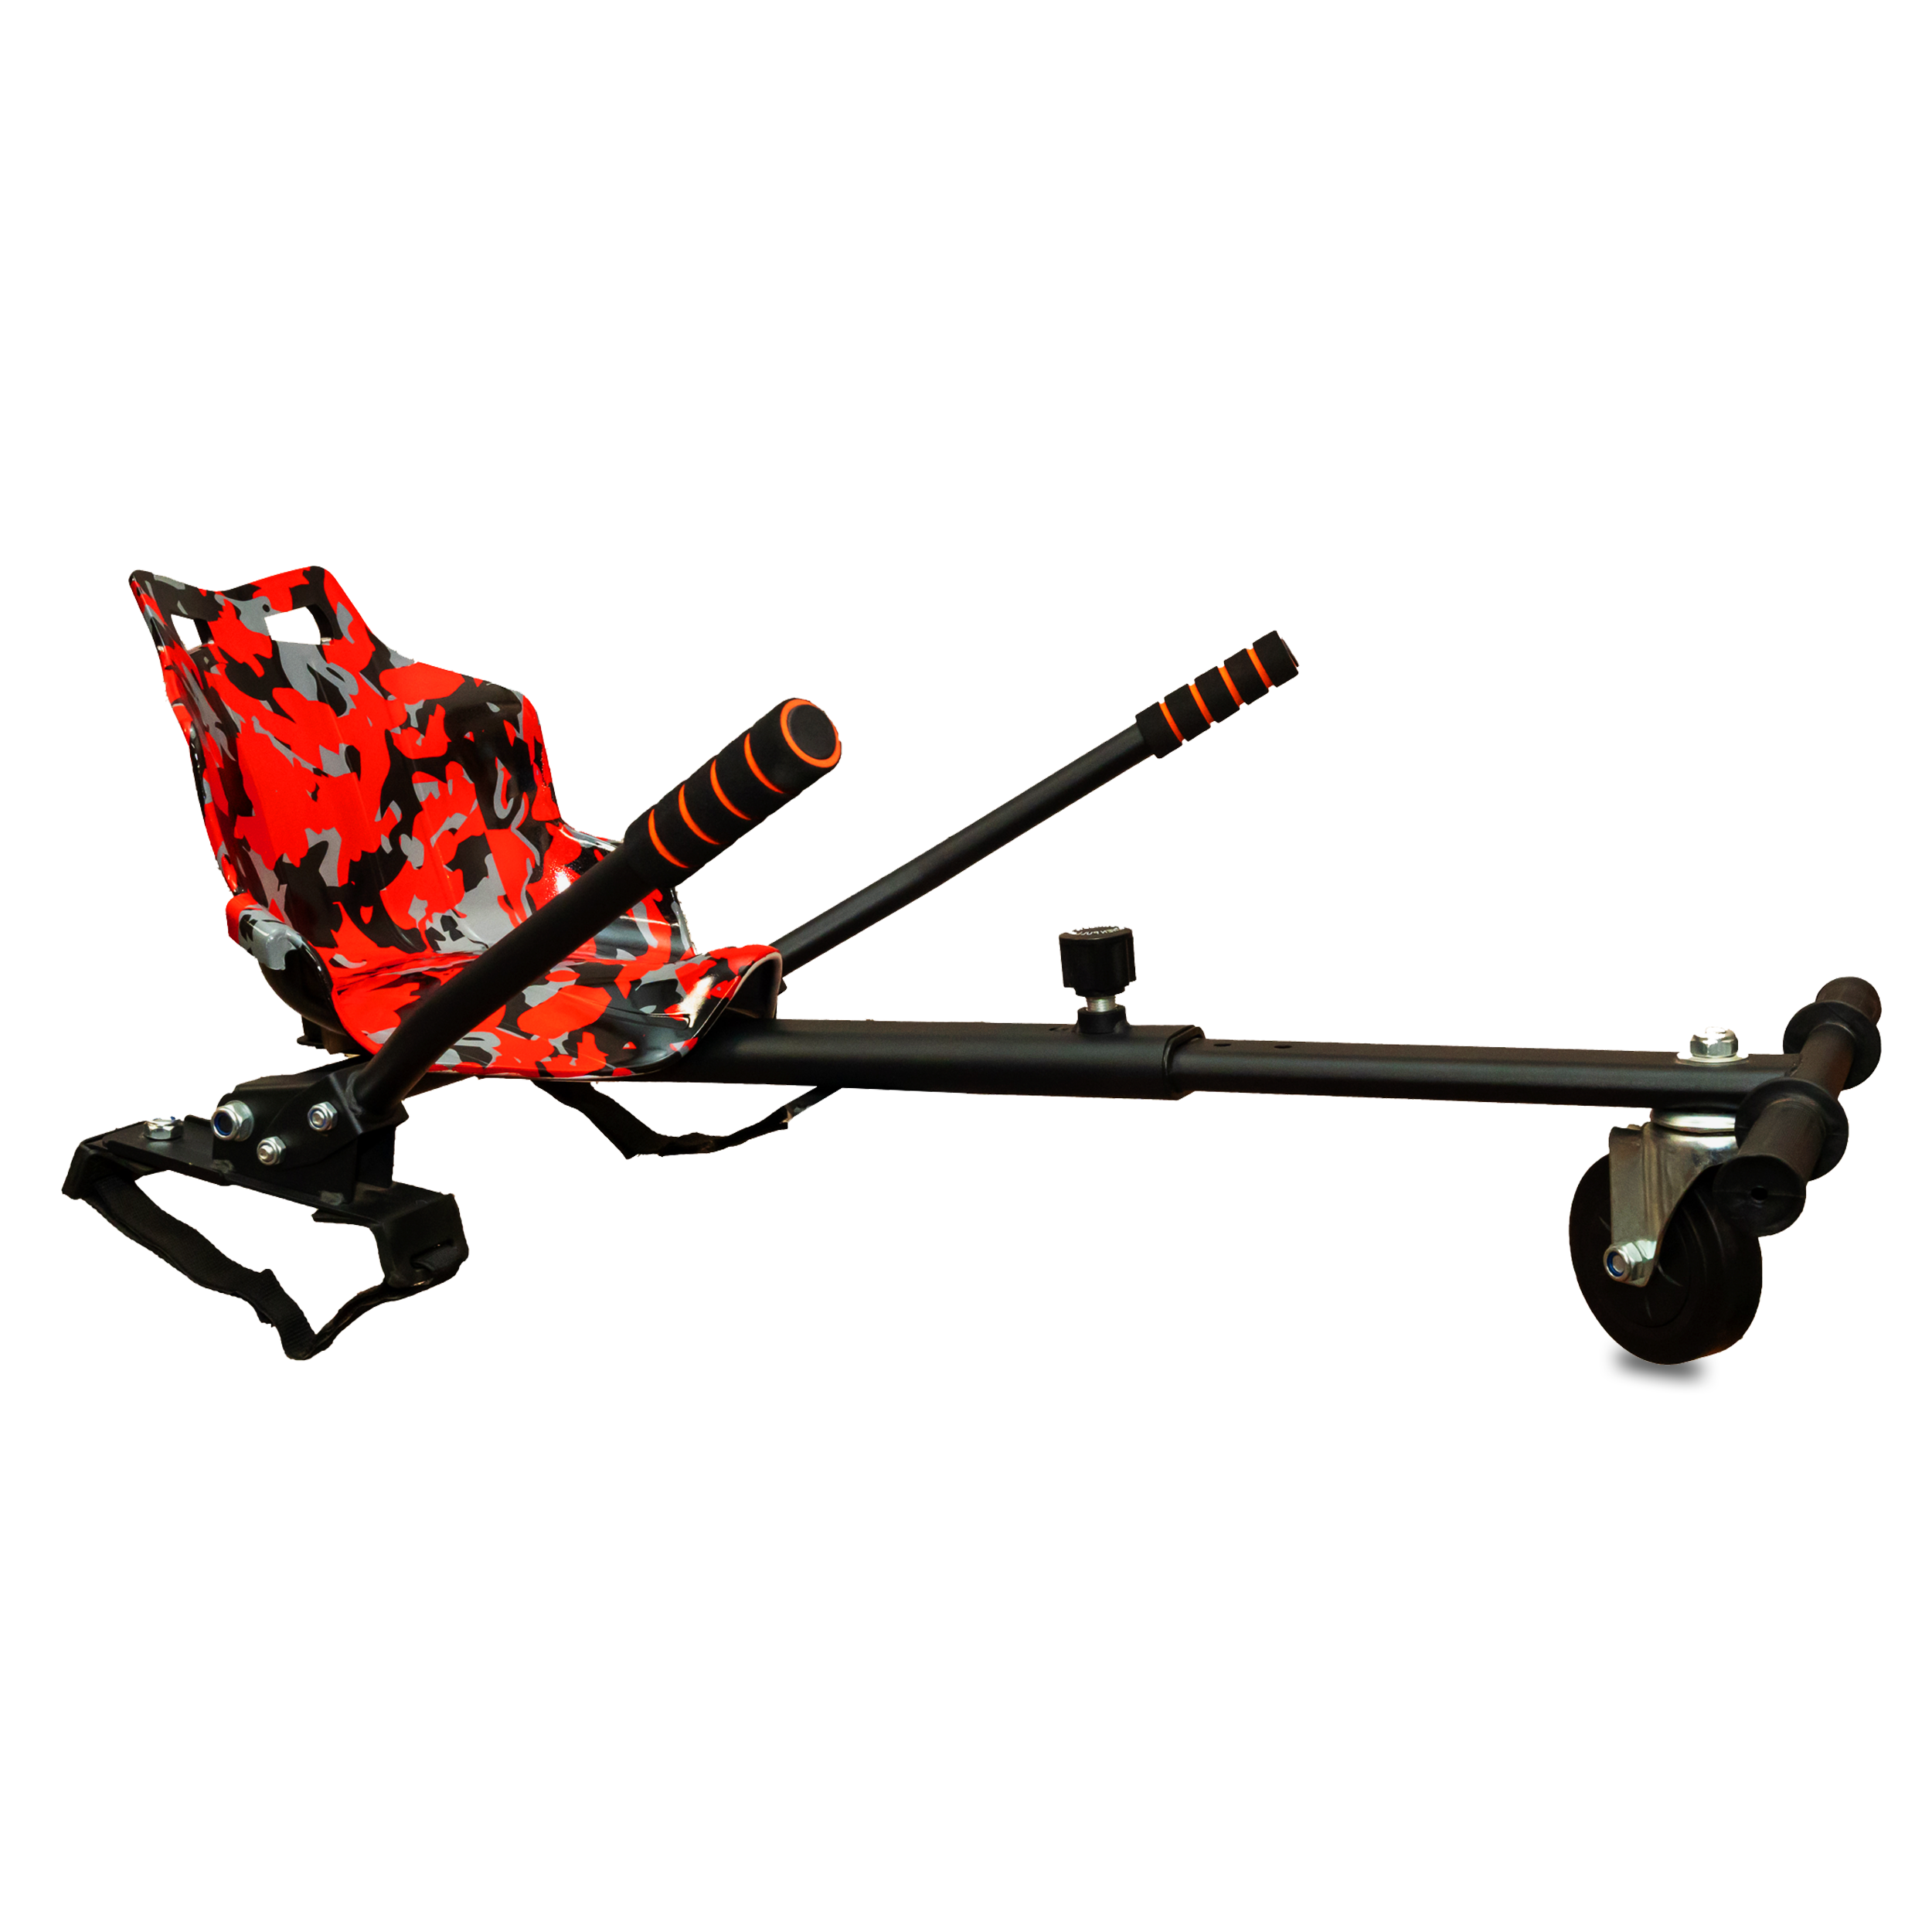 Red and black camouflage hoverboard kart seat with adjustable metal frame and striped handles.